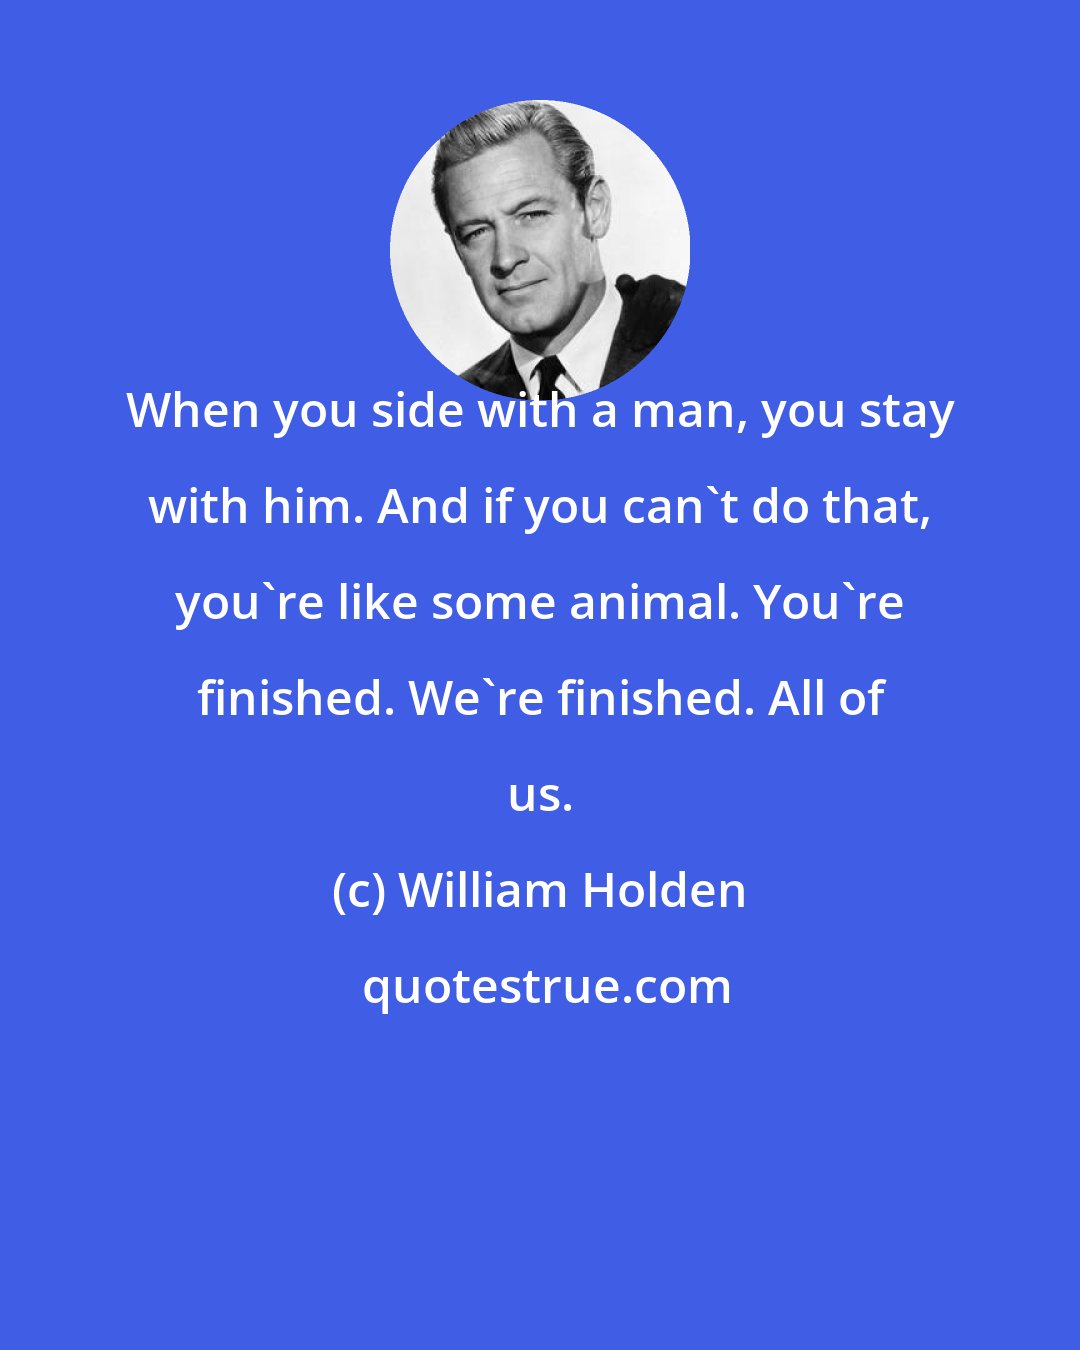 William Holden: When you side with a man, you stay with him. And if you can't do that, you're like some animal. You're finished. We're finished. All of us.